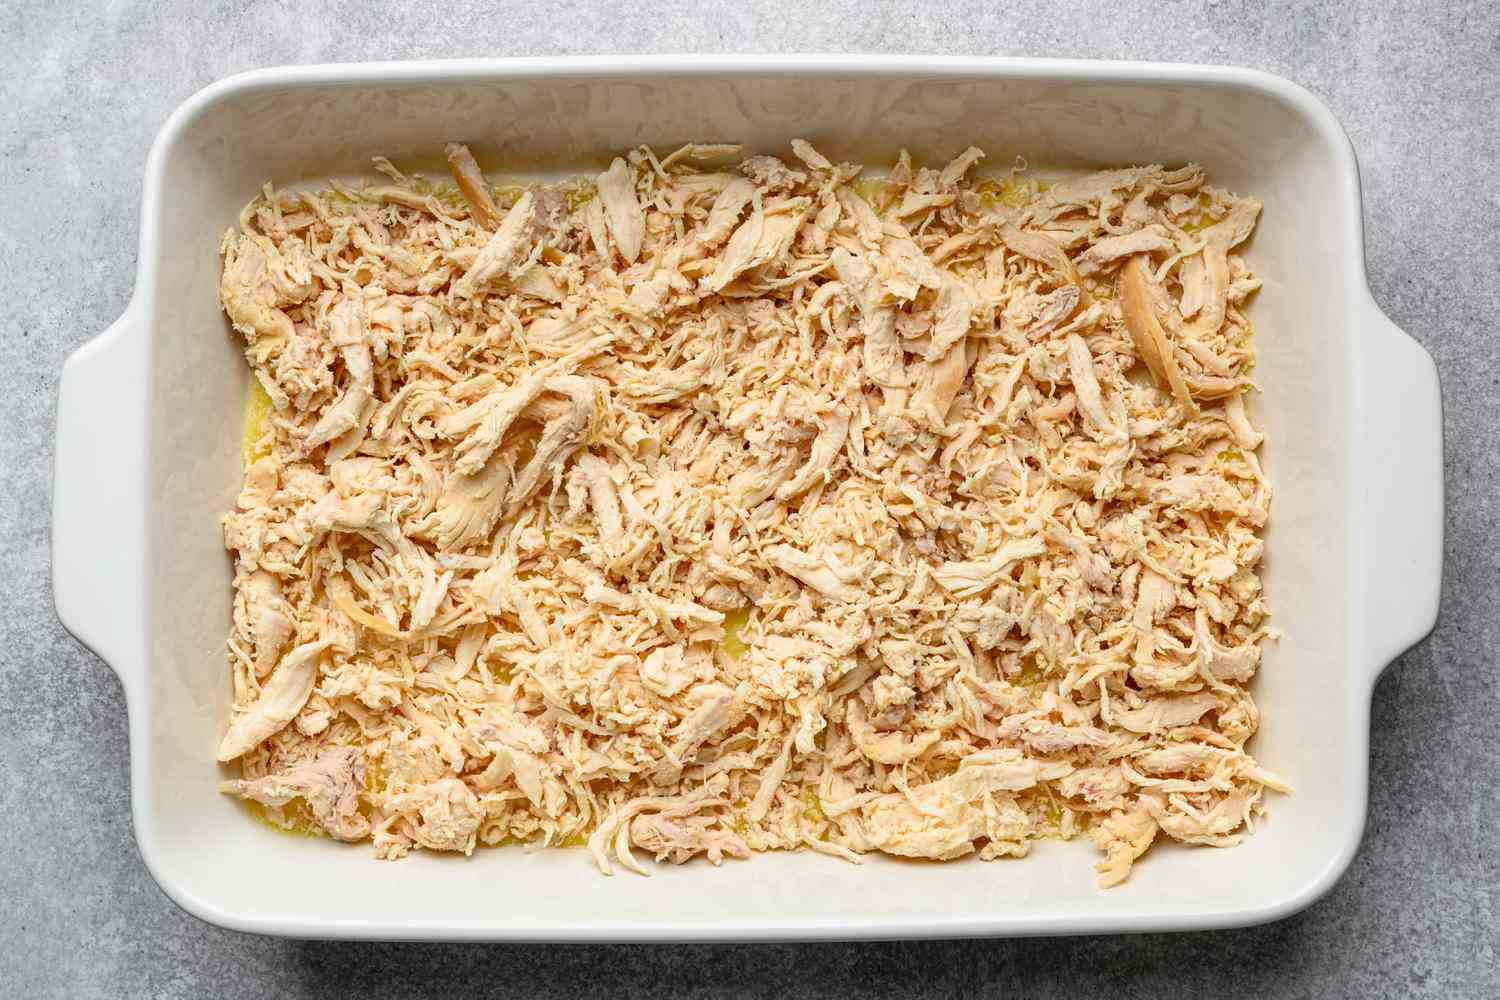 A 9 x 13 baking dish with melted butter and shredded chicken